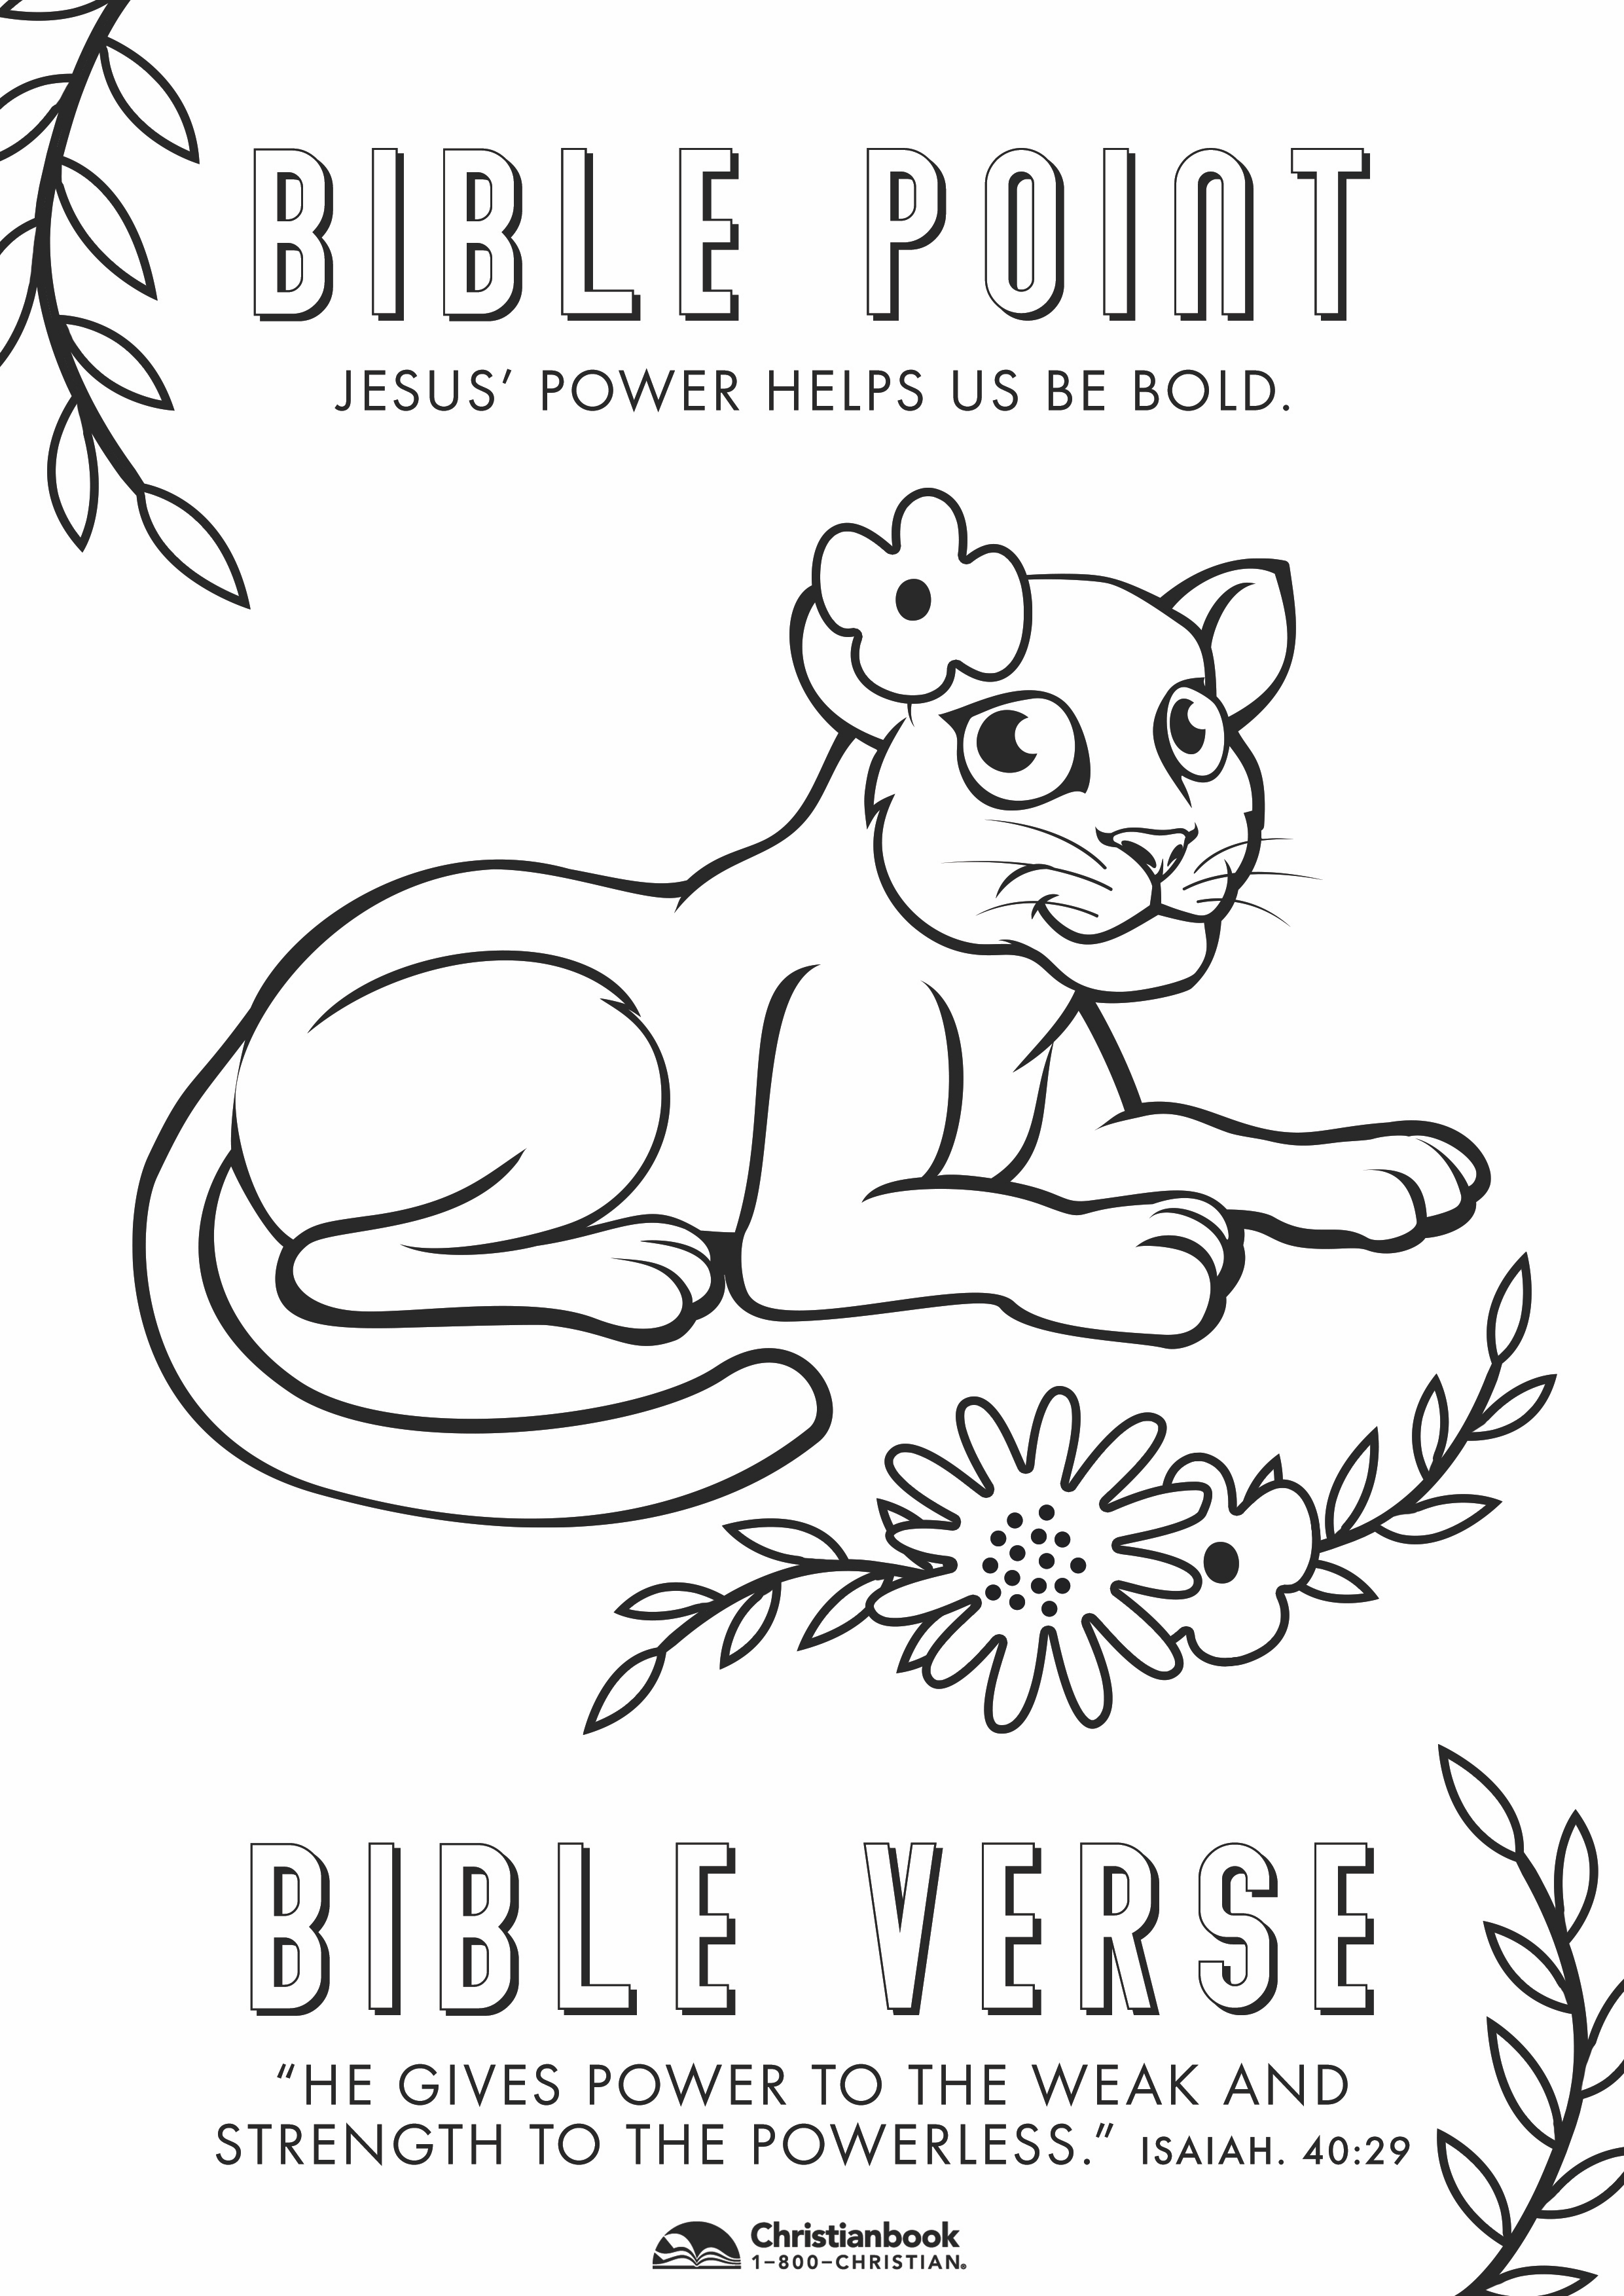 Rocky Railway VBS 2020 Coloring Downloads - Christianbook.com Blog